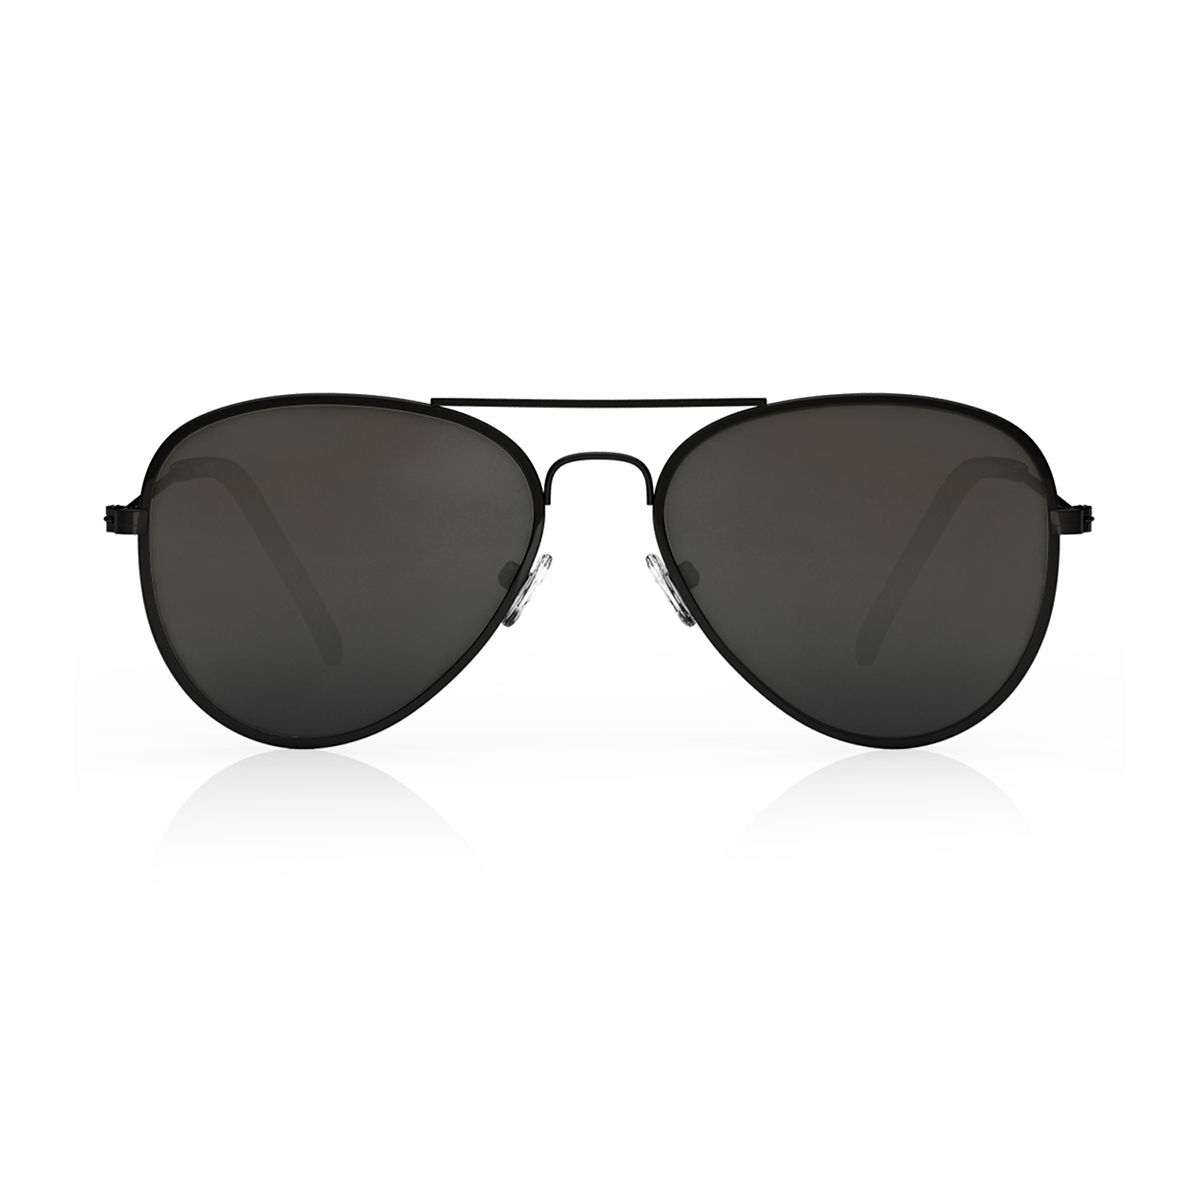 Occasus | Black Round Aviator Sunglasses | In stock! | Lucleon-tuongthan.vn